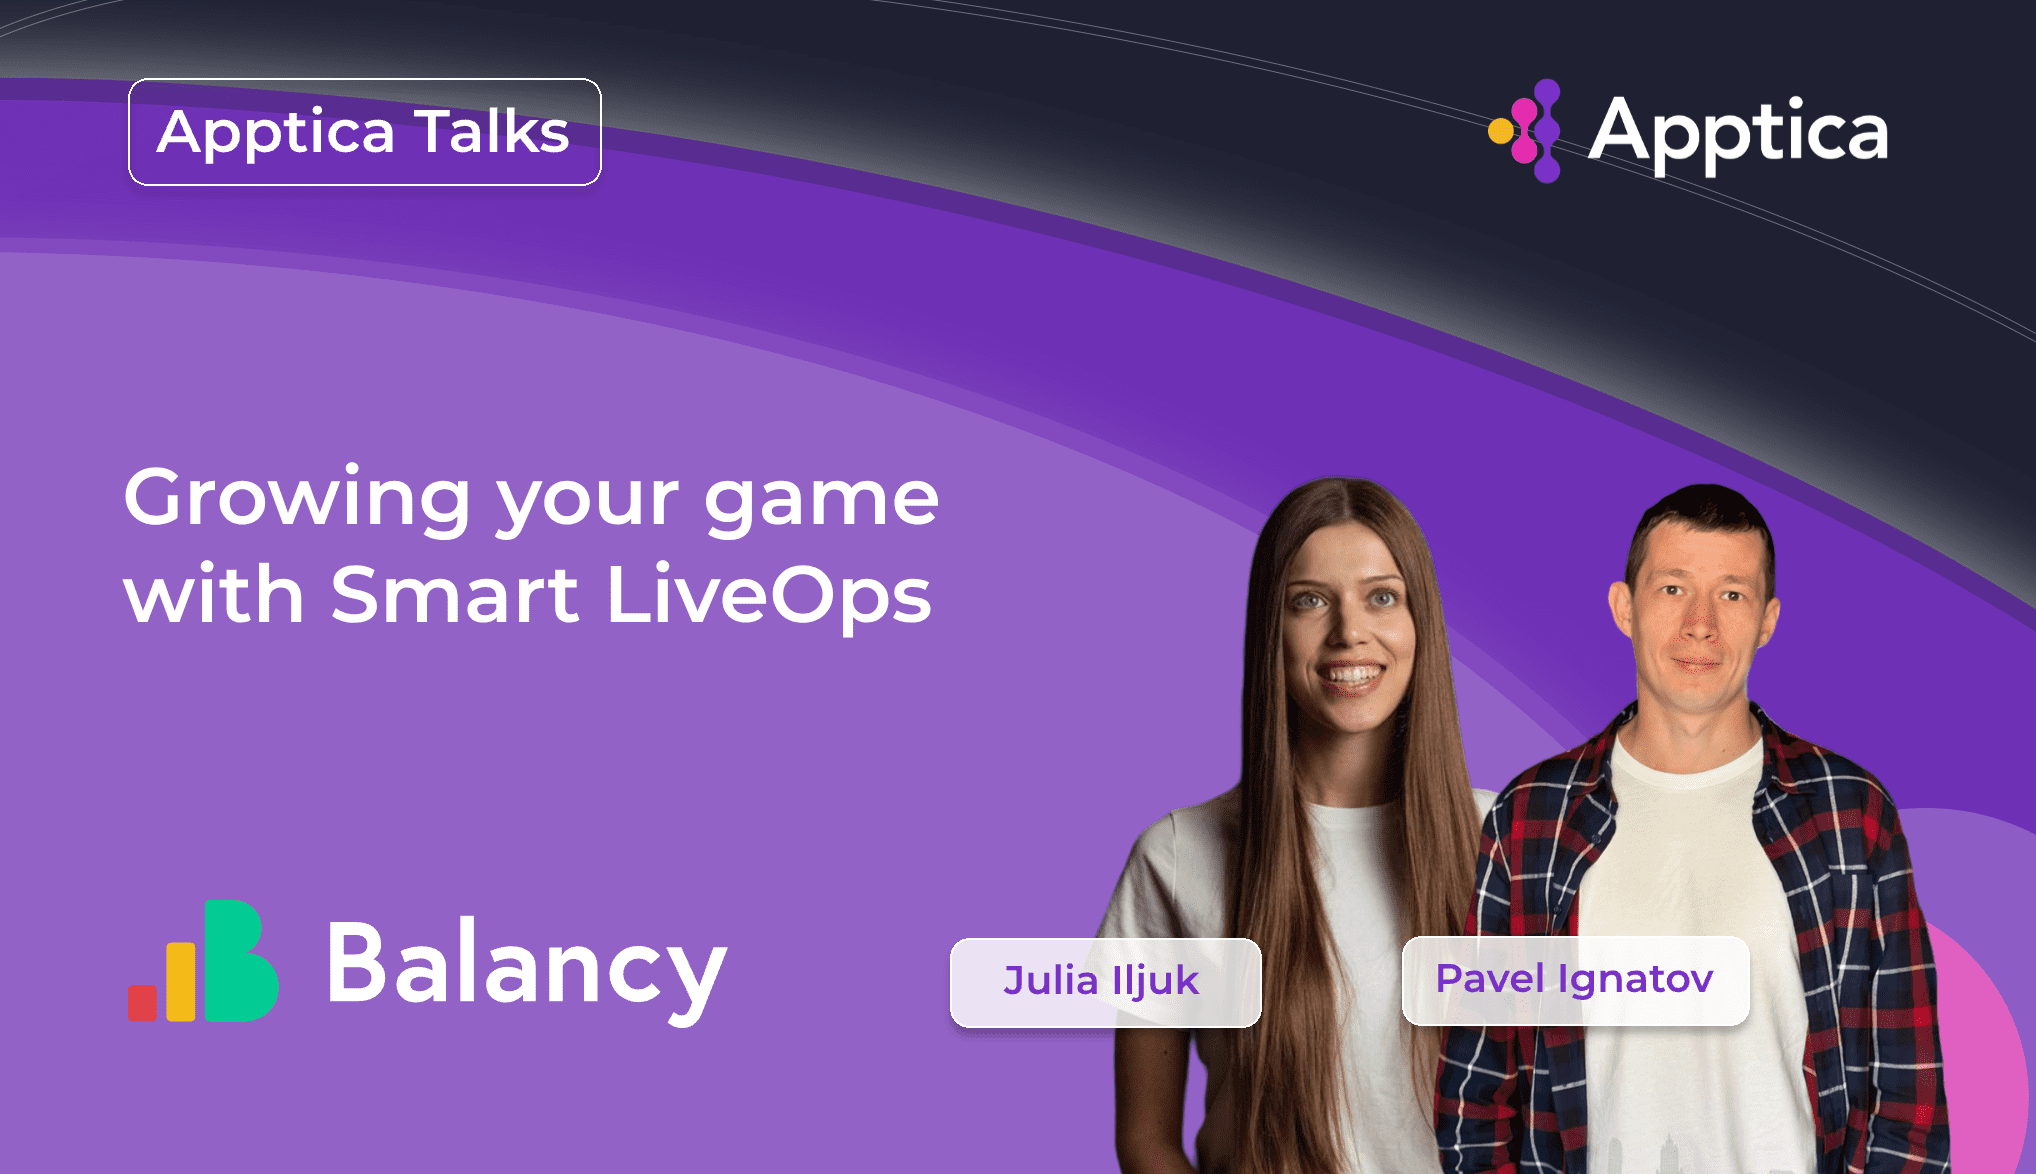 Apptica Talks. Episode #7. Growing your game with Smart LiveOps with Julia Iljuk and Pavel Ignatov from Balancy